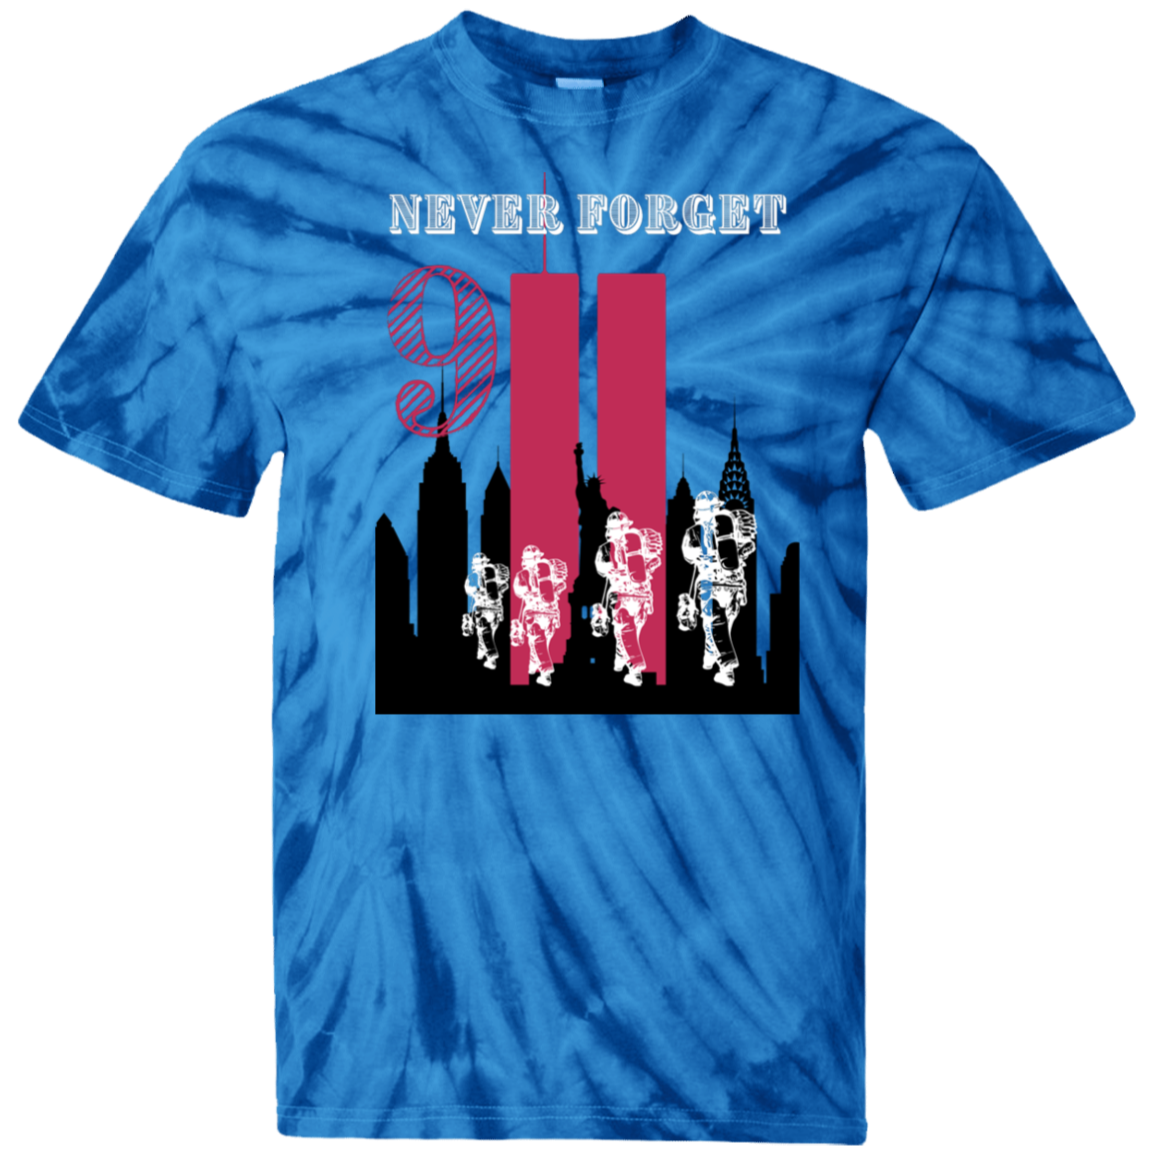 NEVER FORGET YOUTH Tie Dye T-Shirt